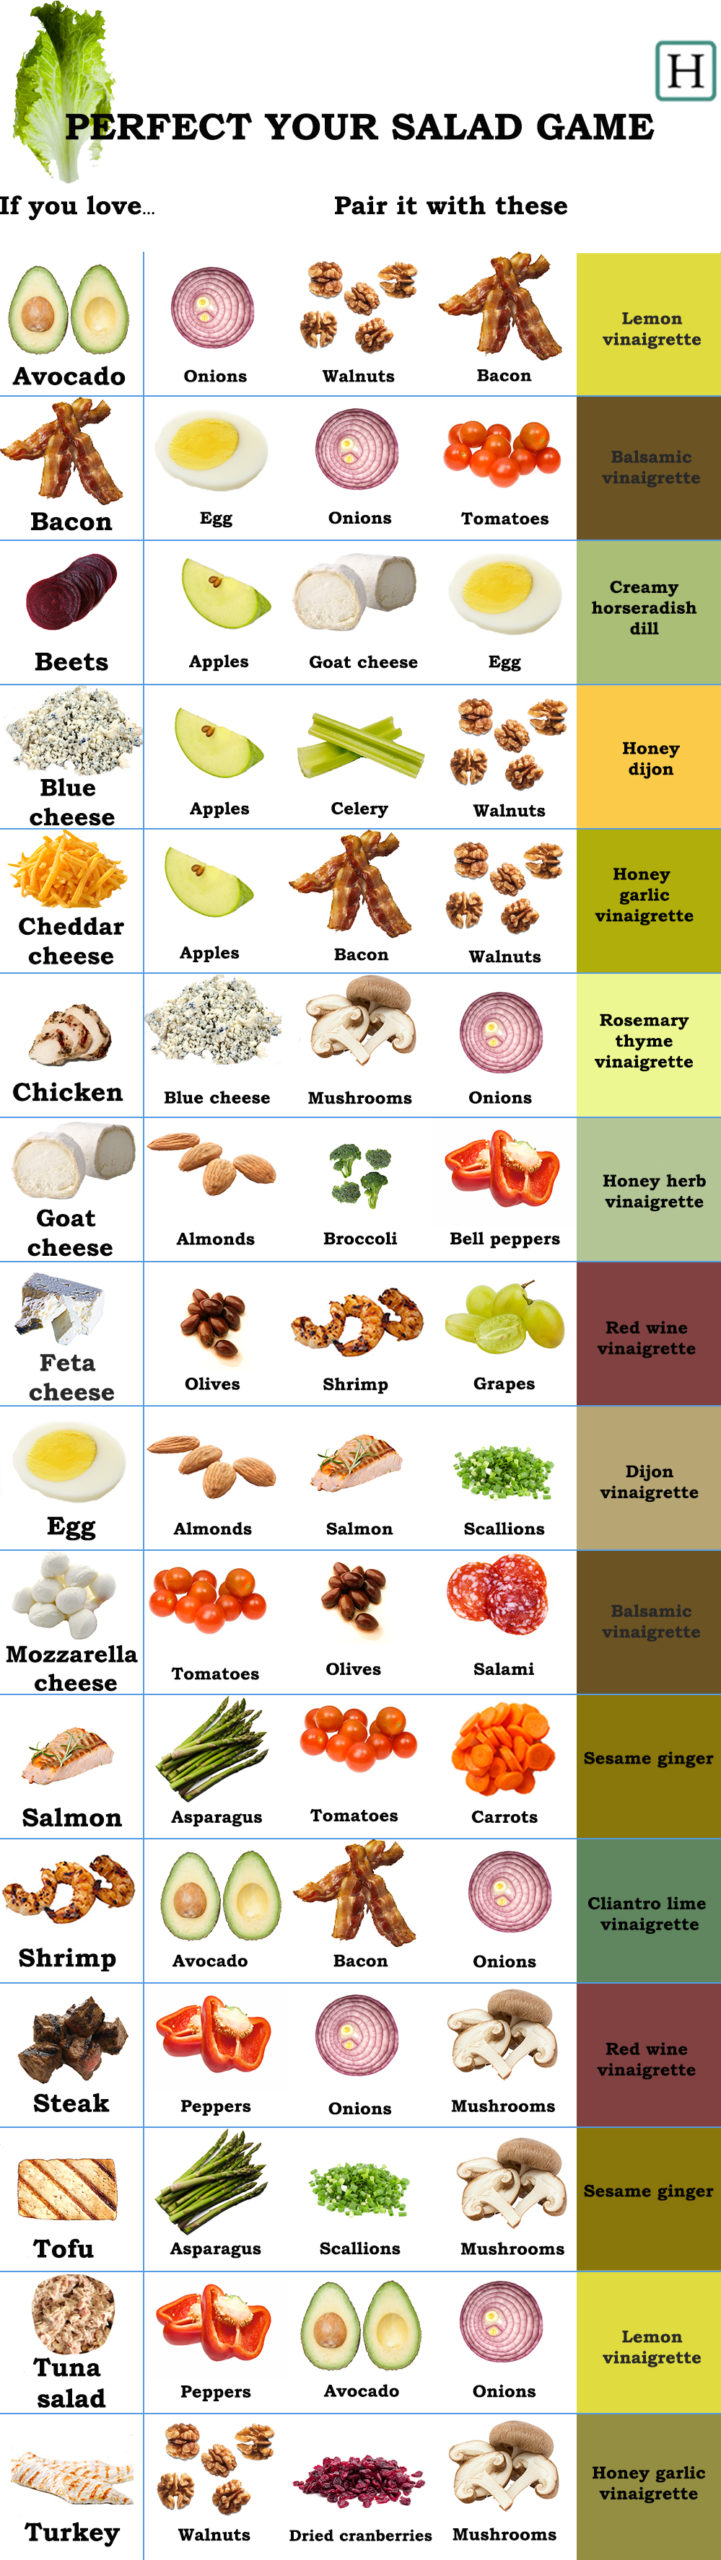 This Graphic Shows How To Pair Ingredients For More Flavourful Salads